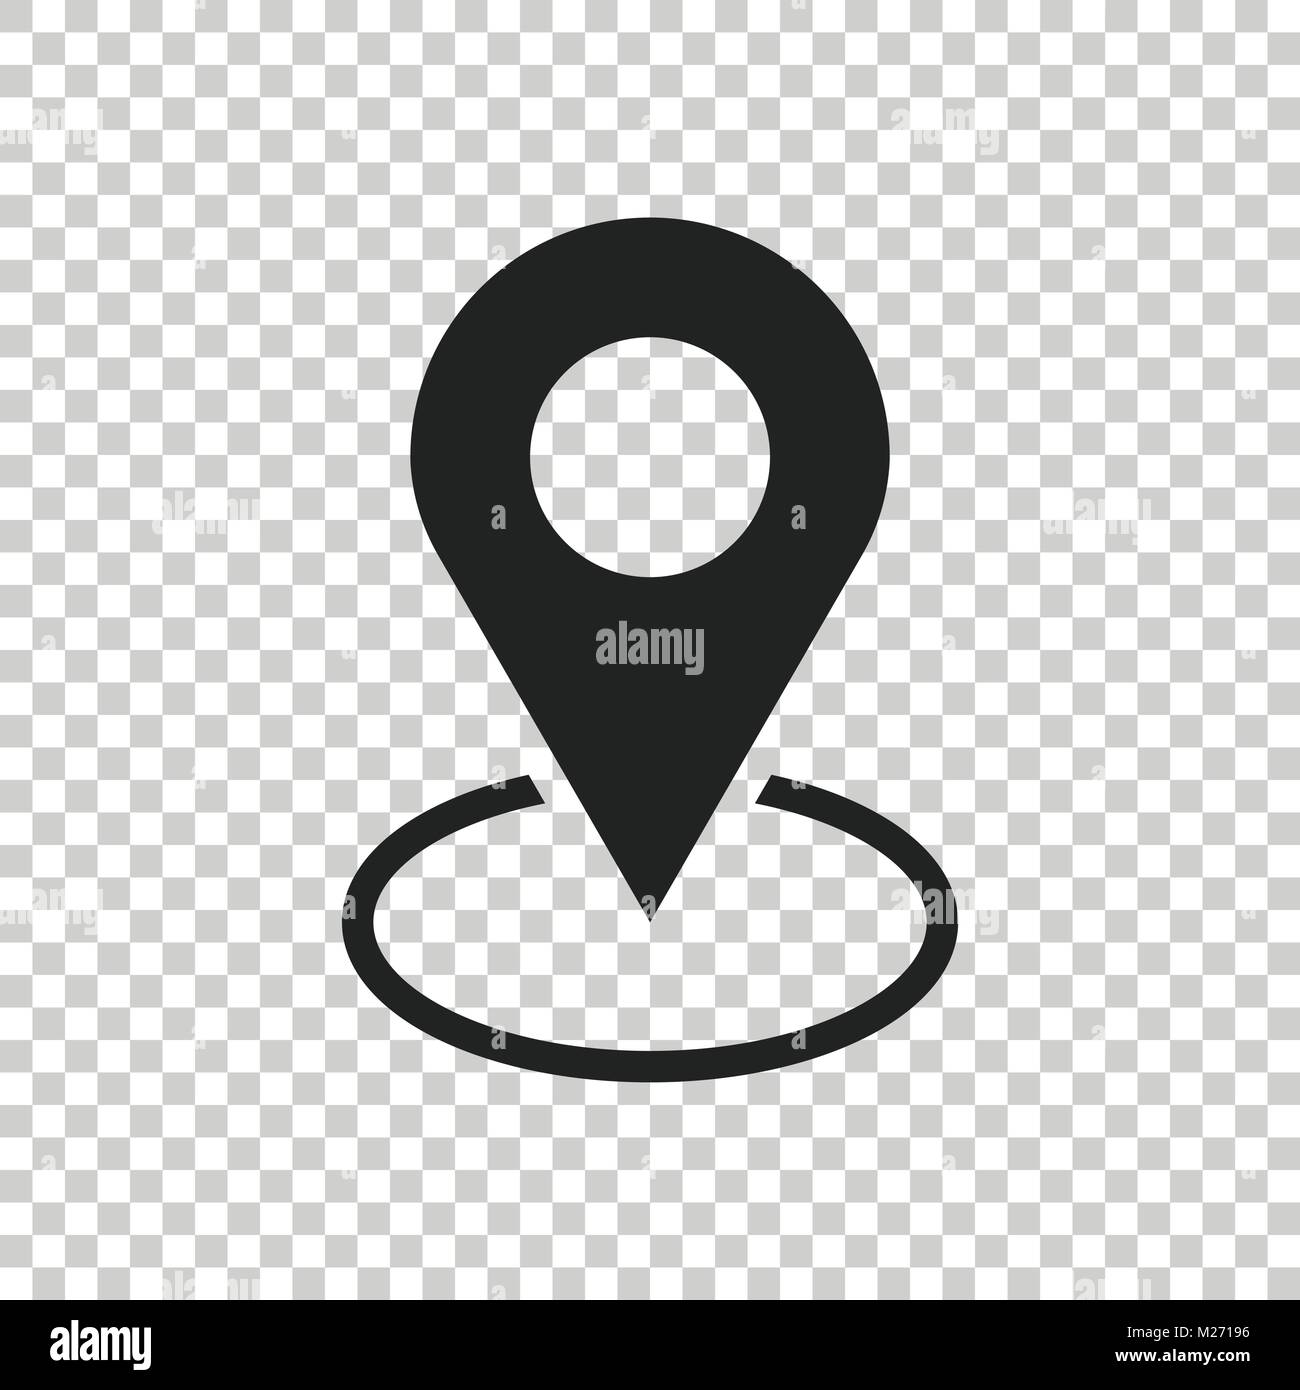 Pin Icon Vector Location Sign In Flat Style Isolated On Isolated Background M27196 